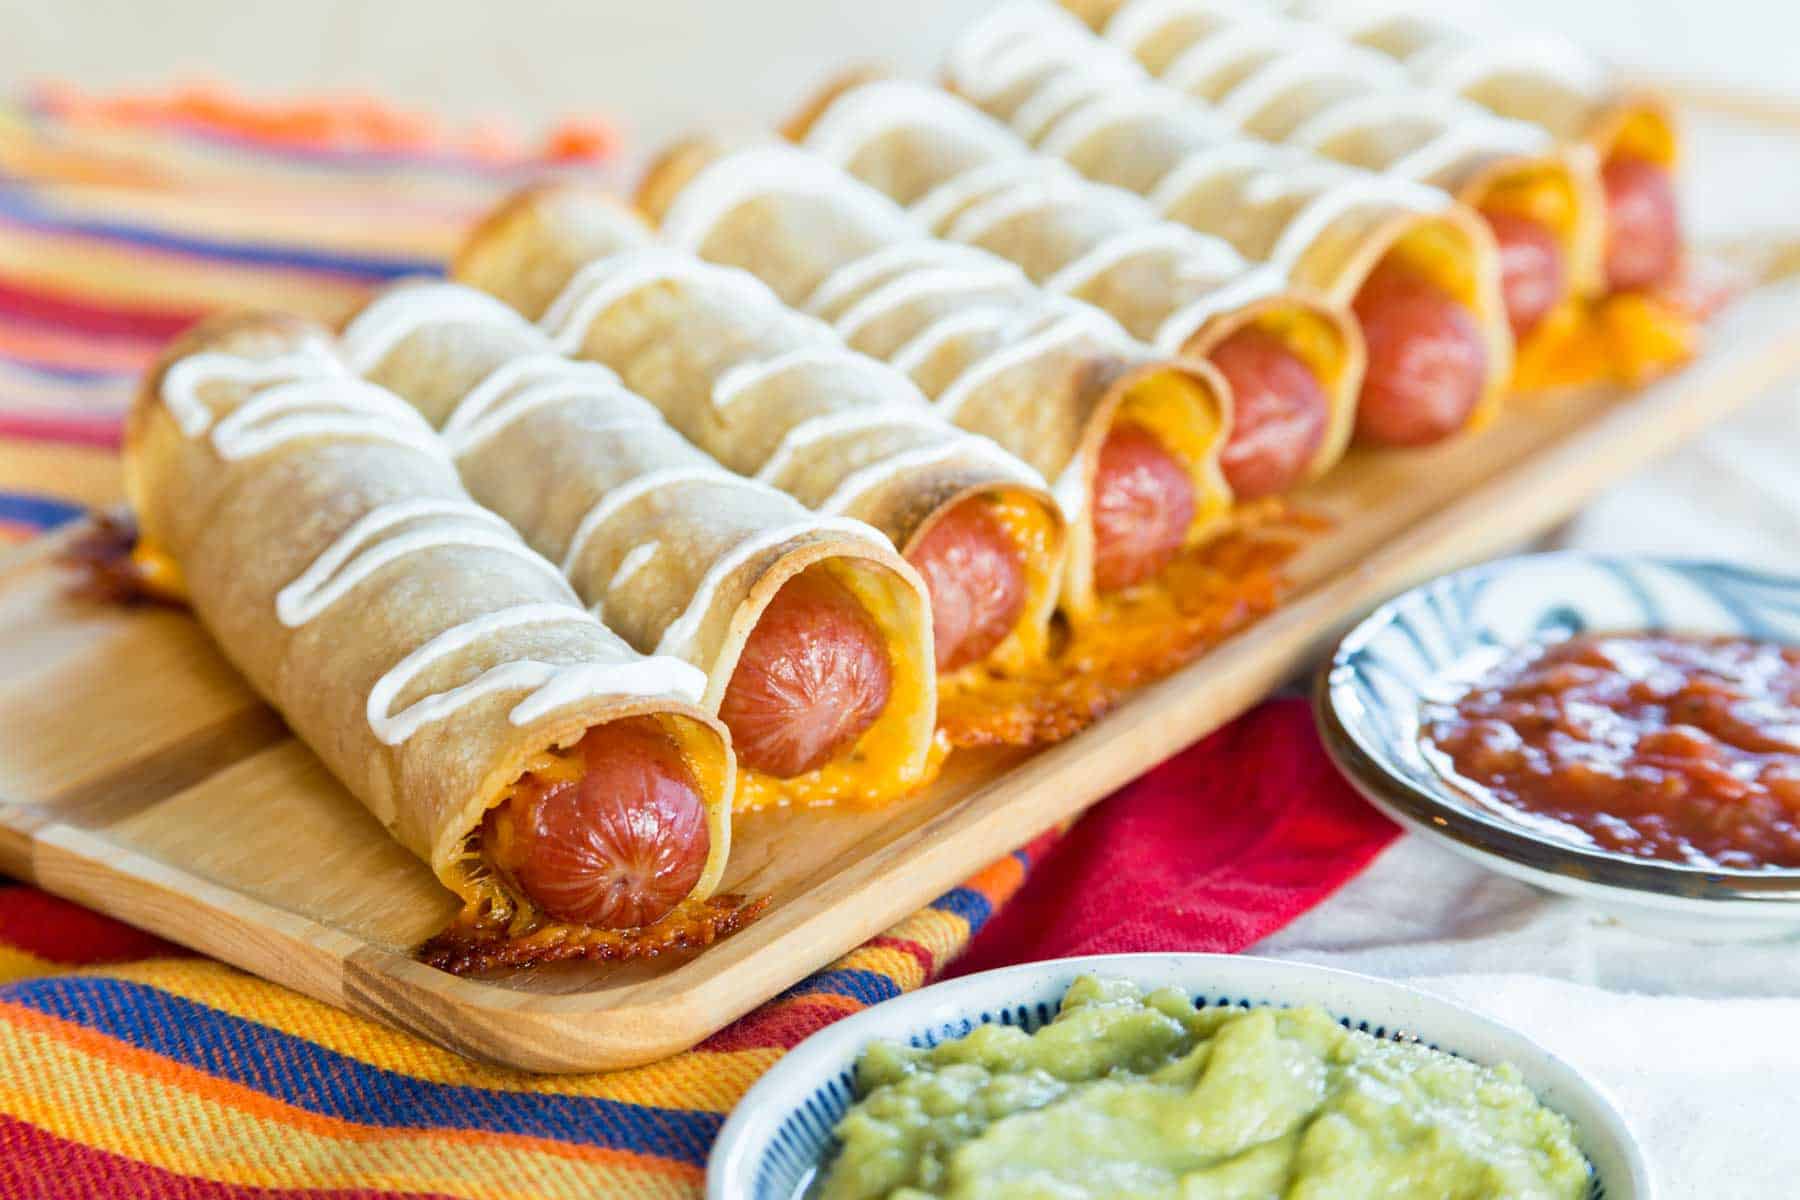 A row of Mexican Hot Dog Taquitos on a wooden serving plate with small dishes of salsa and guacamole.